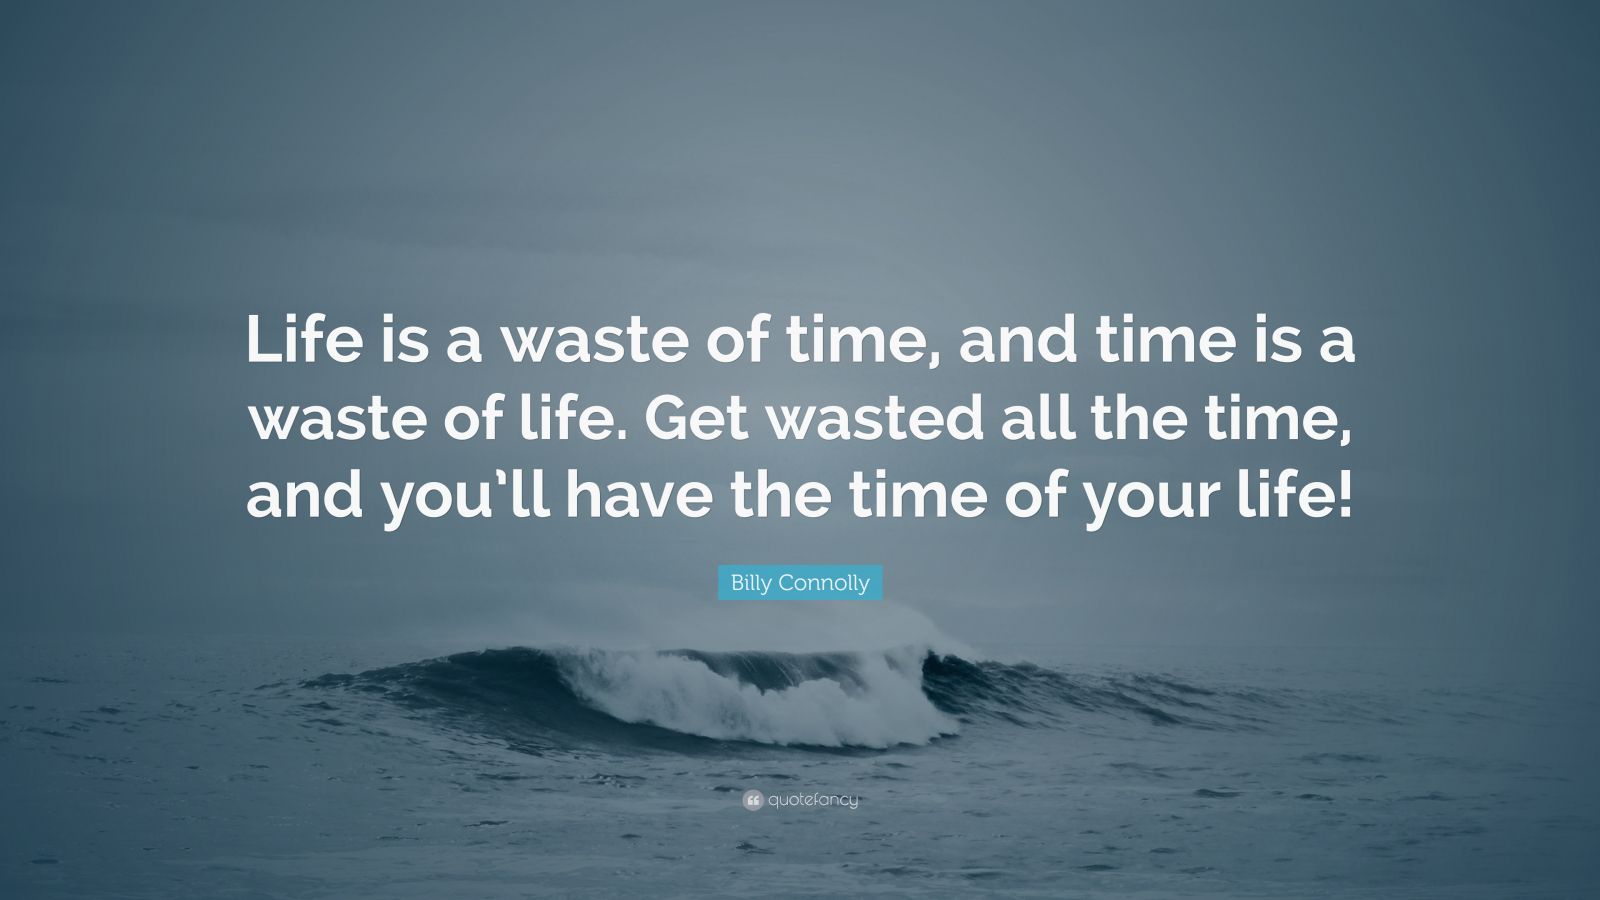 billy connolly quote life is a waste of time